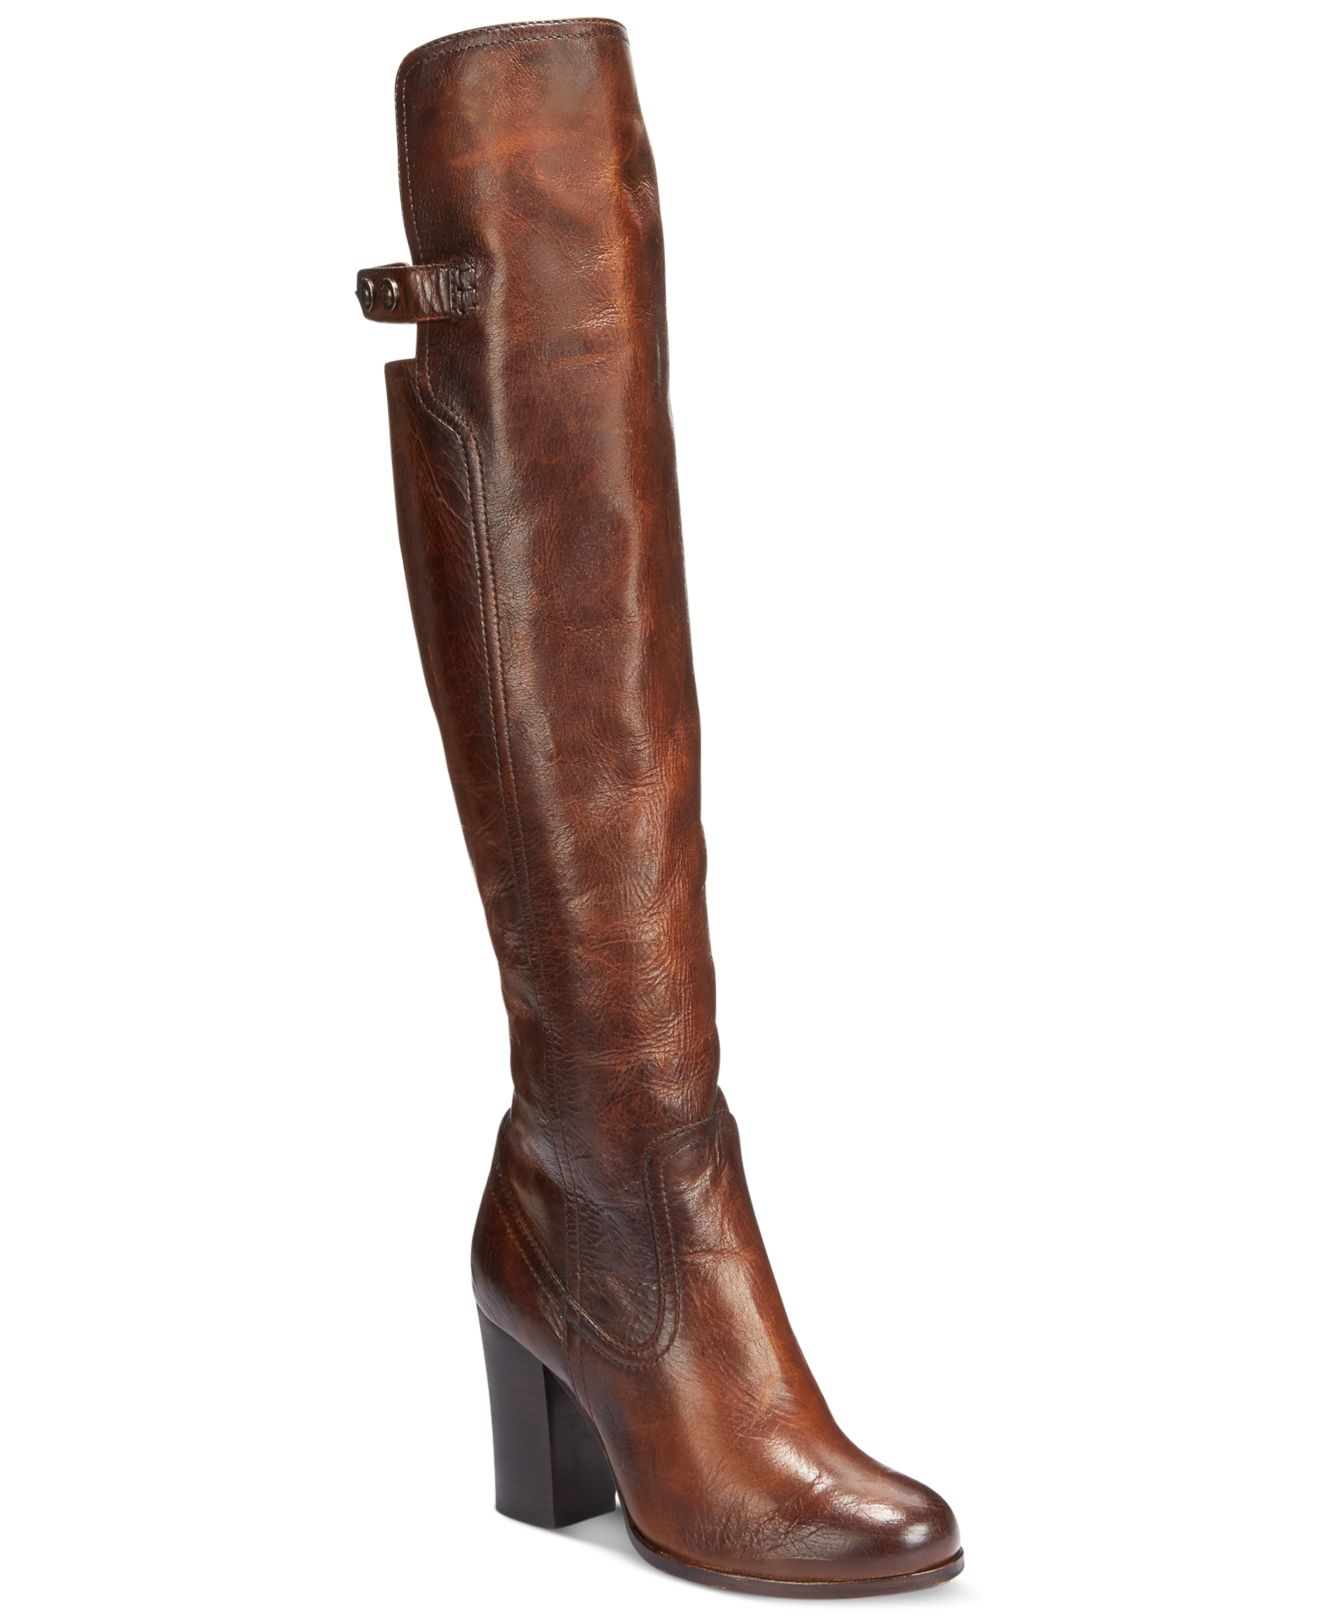 Lyst - Frye Parker Over-the-knee Boots in Brown